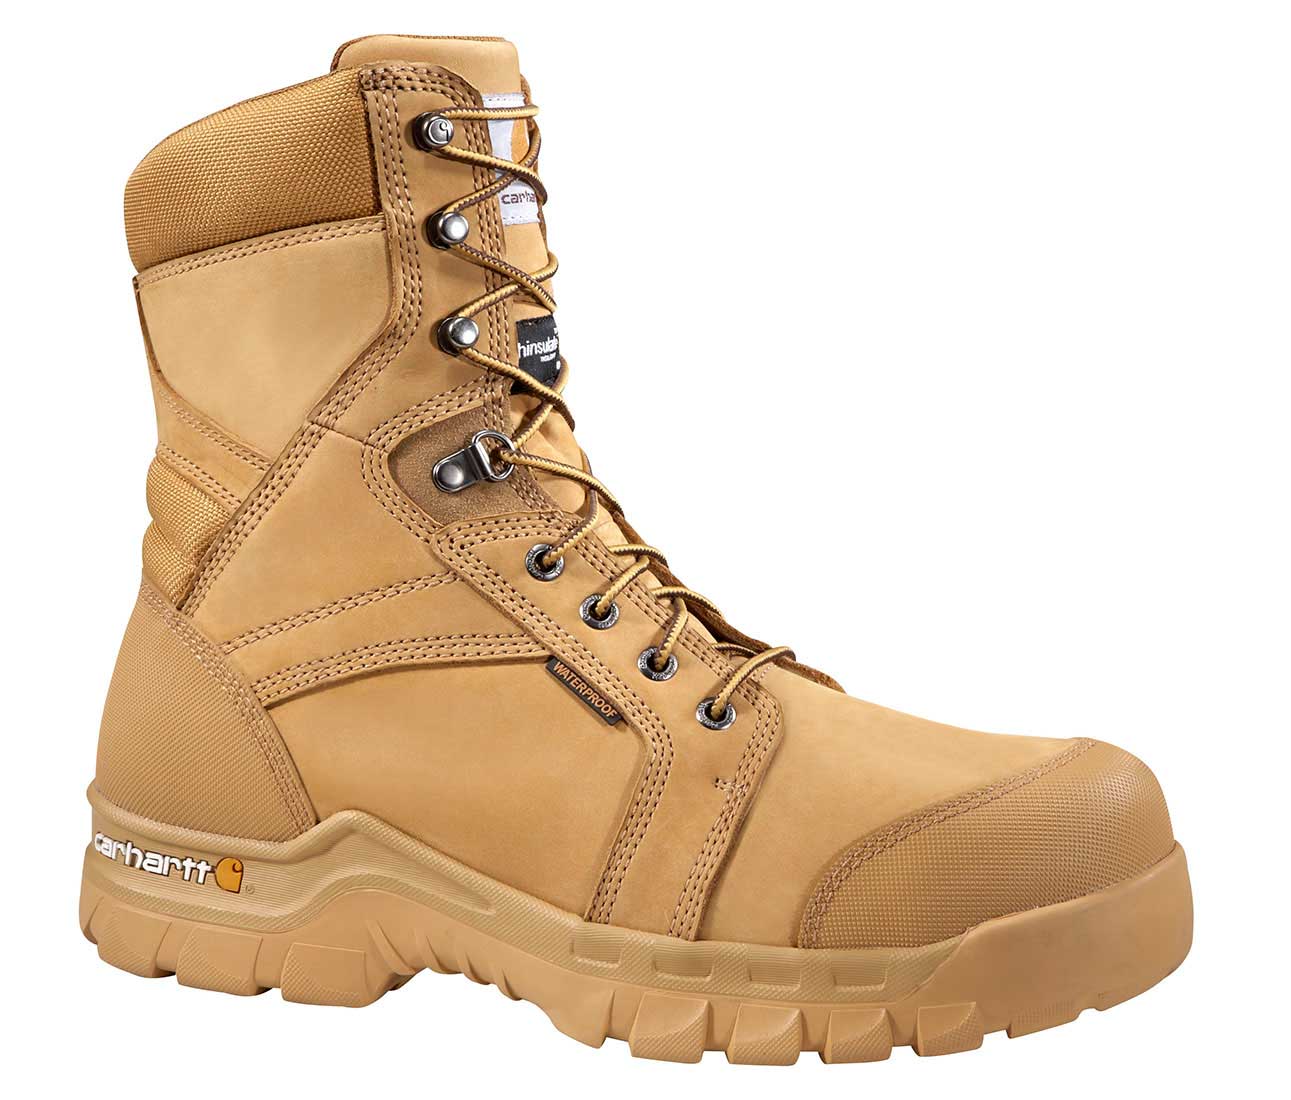 8 inch lace up work boots